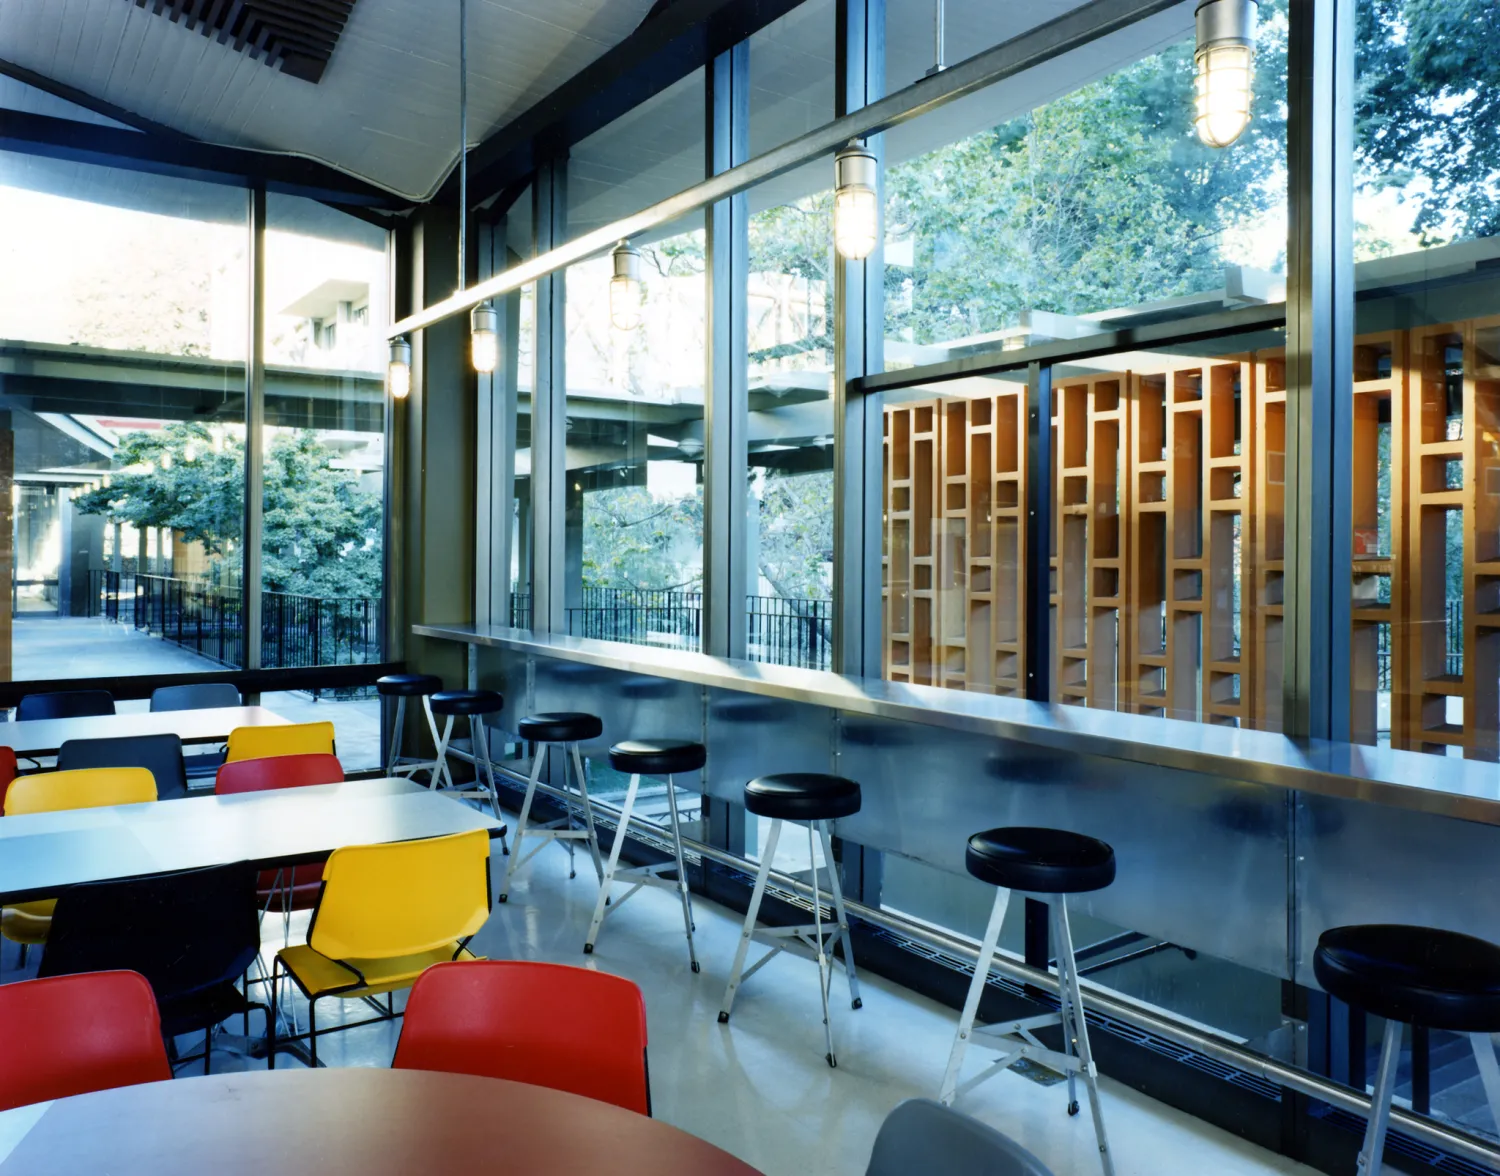 Interior view of U.C. Berkeley Dining Halls with counter and table seating.